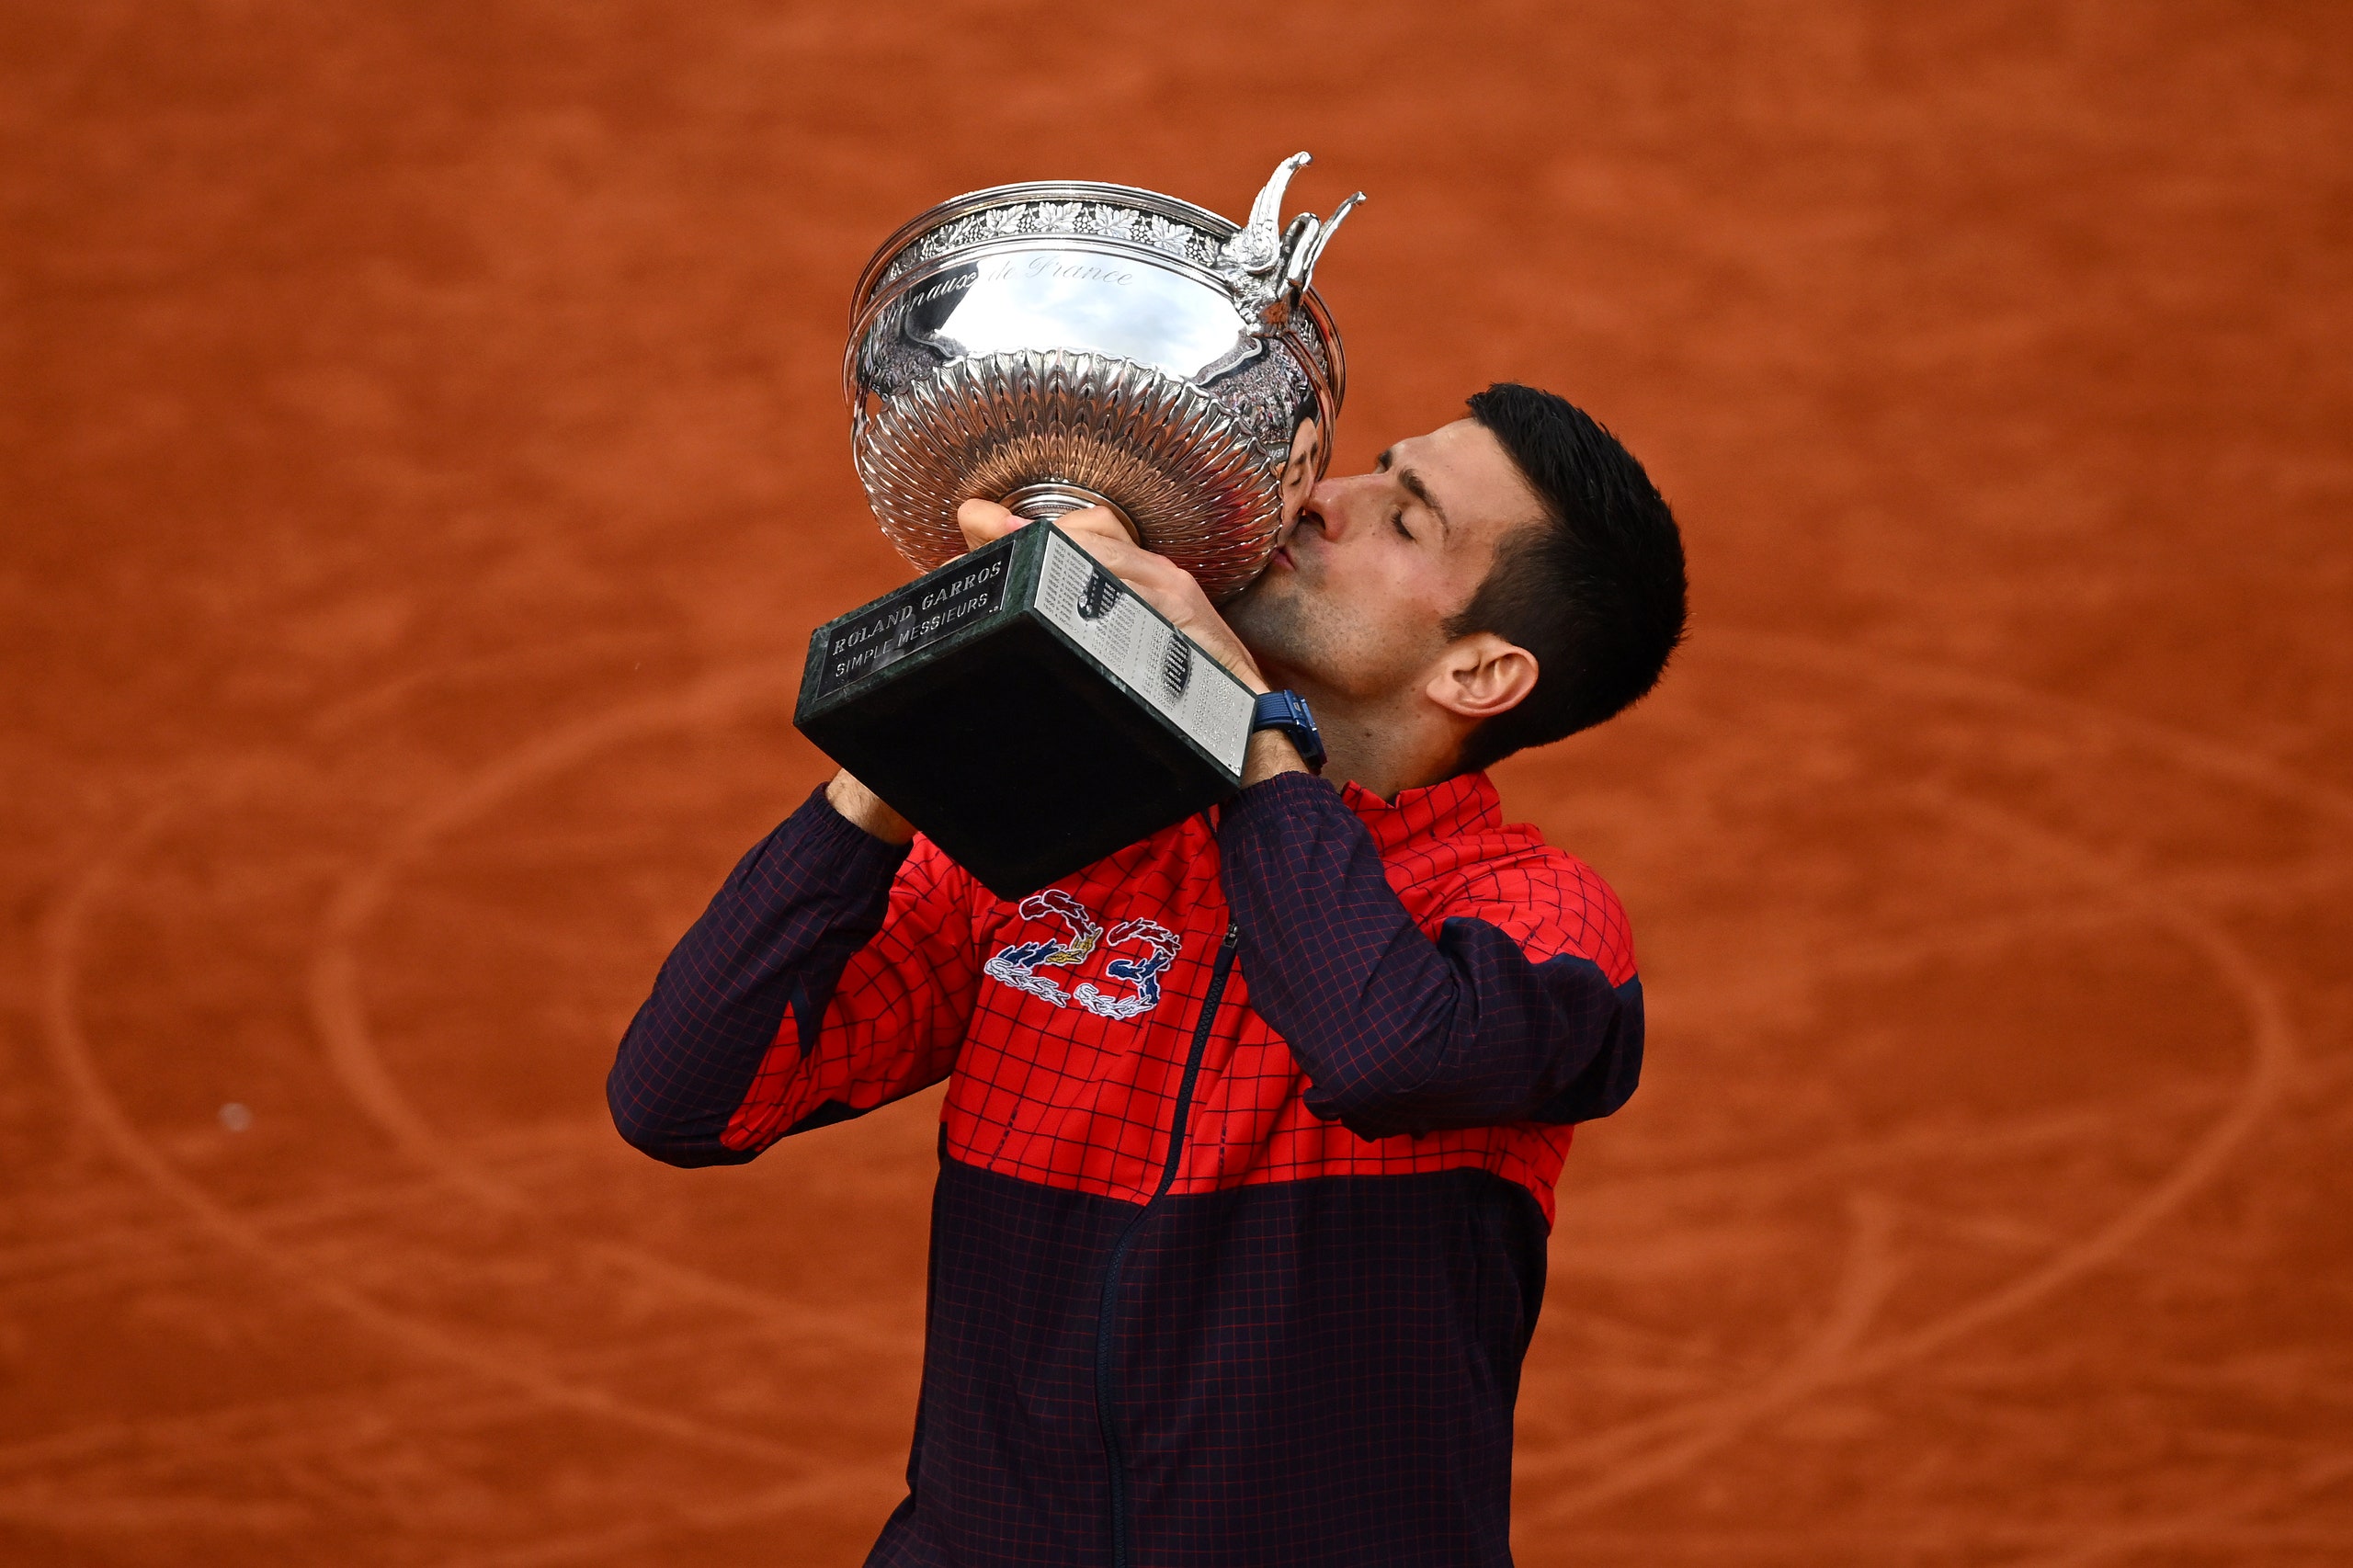 Novak Djokovic Wins His Historic 23rd Grand Slam at the French Open